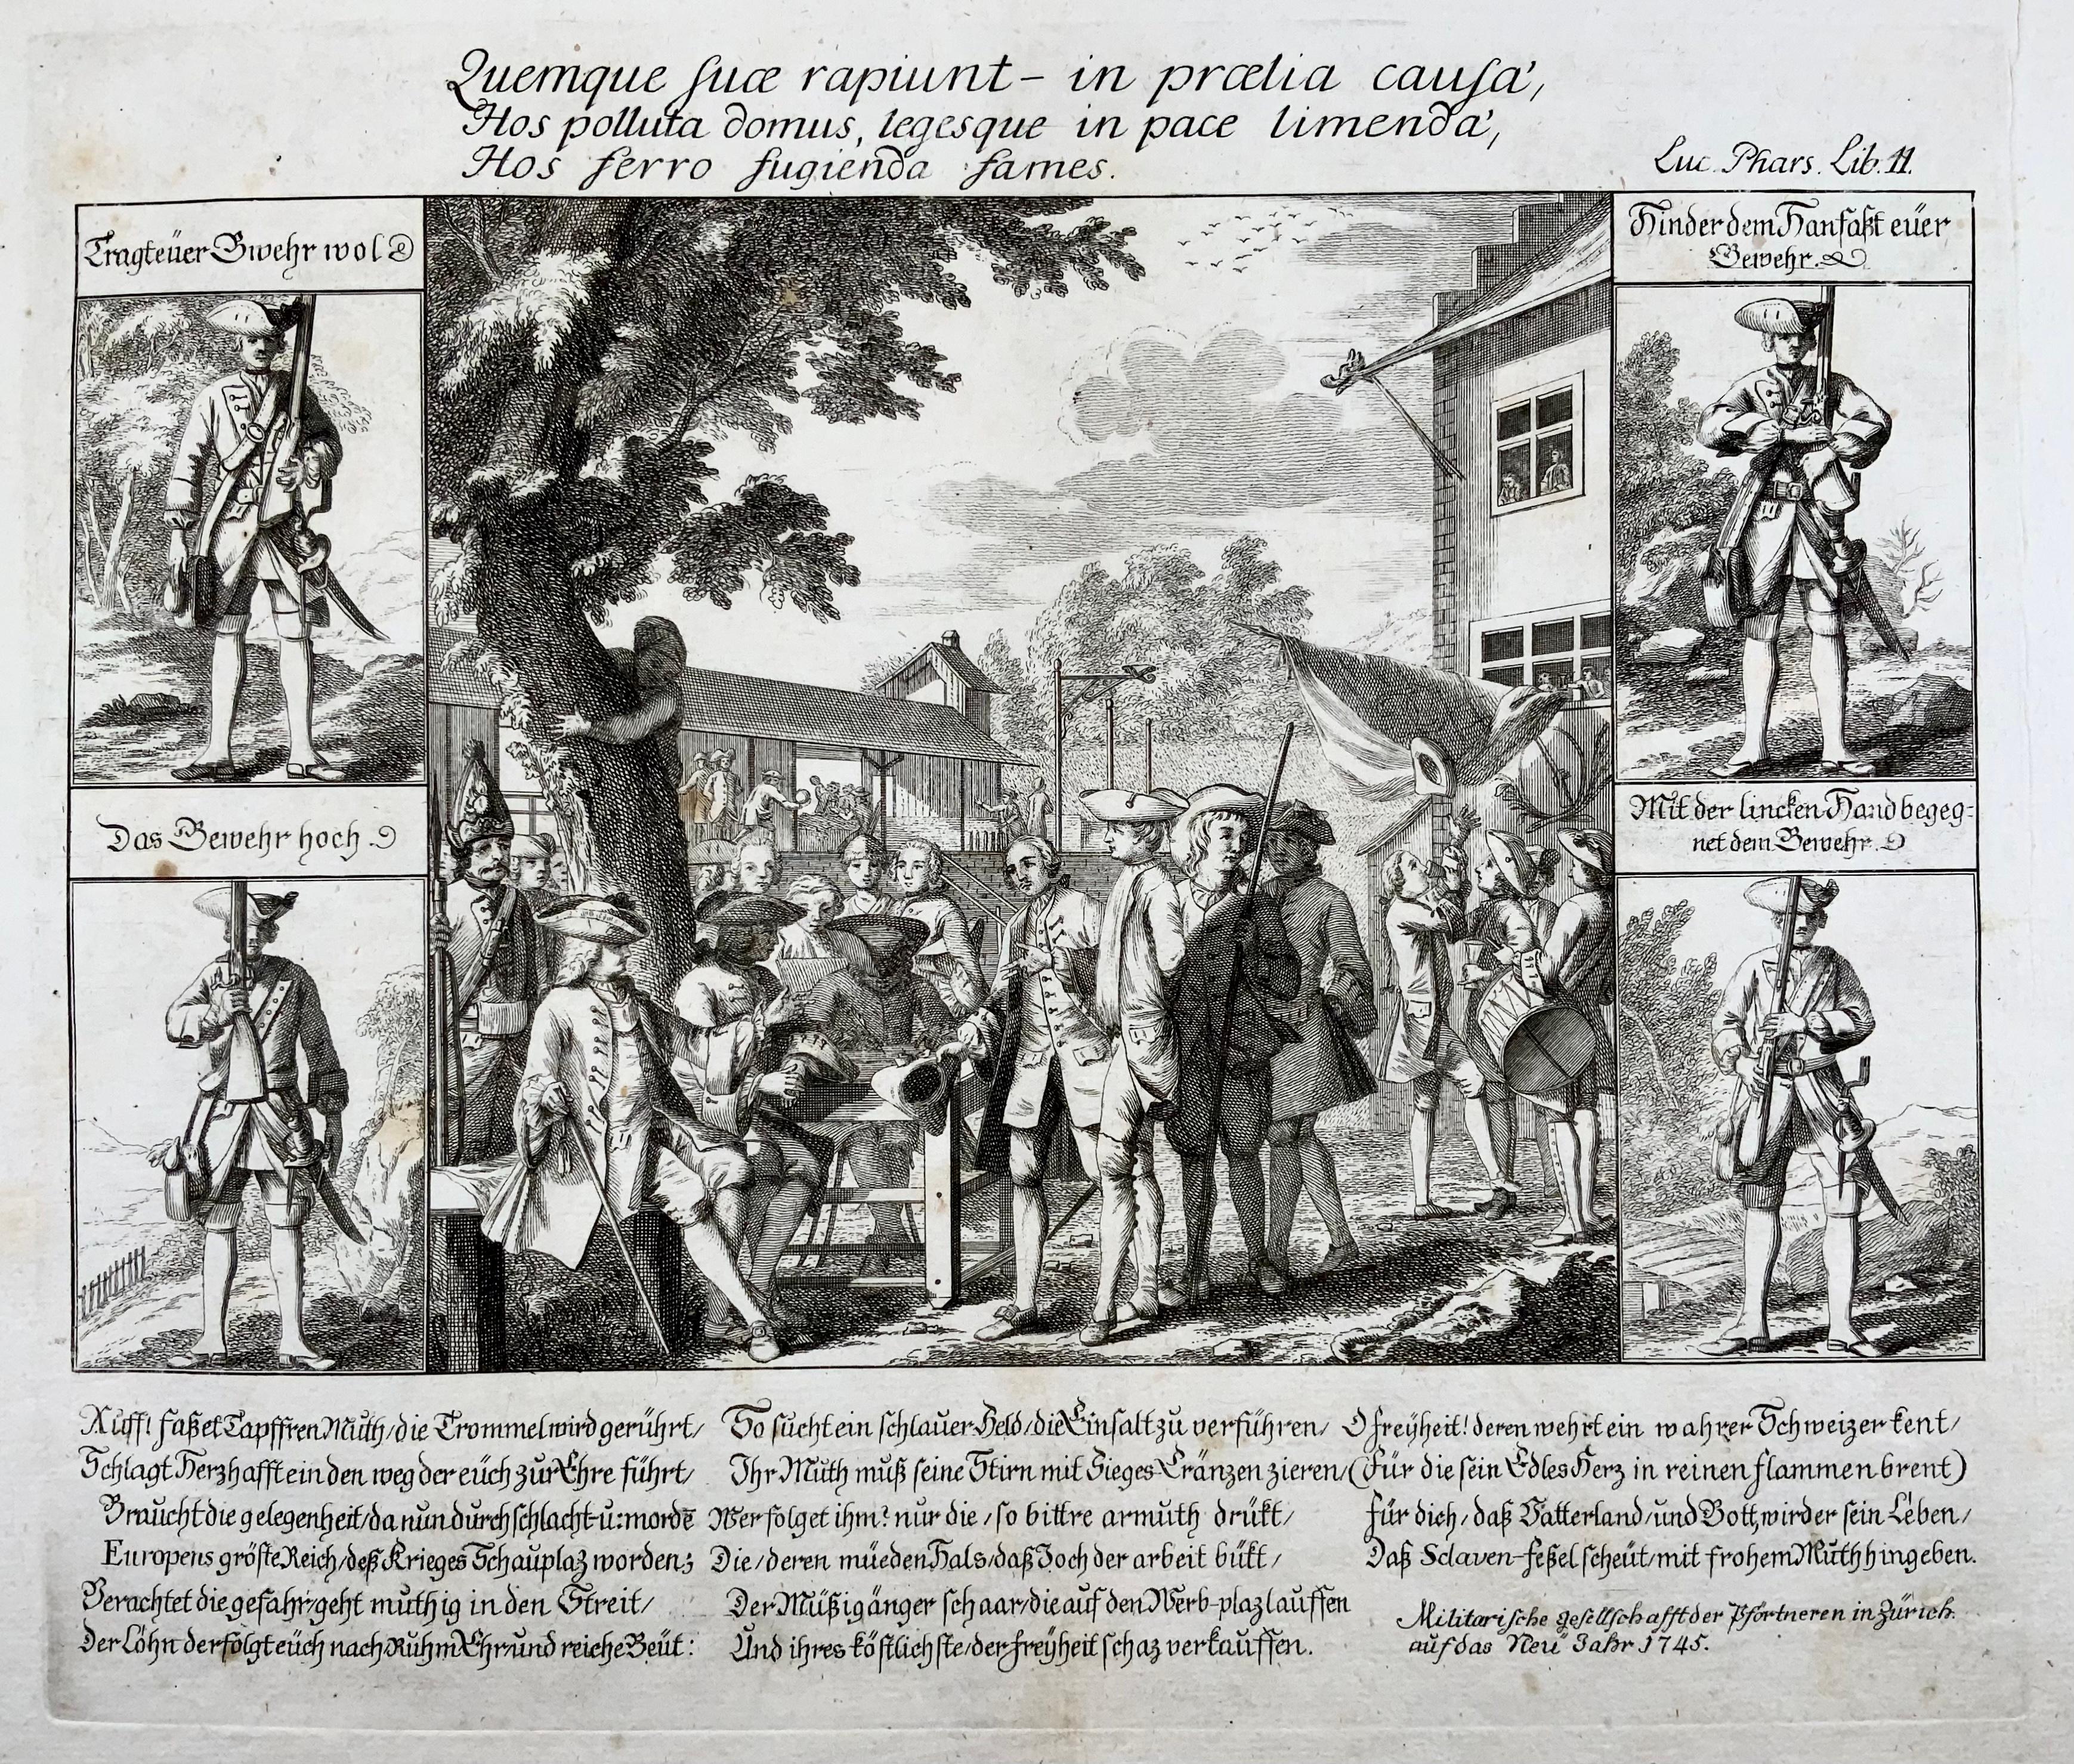 Quemque suae rapiunt - in proelia cause, Hos polluta do us, legesque in pace limenda, Hos ferro fugiendo fames

Rare Broadside depiction of an Army Recruiting scene with descriptive text.

Etching.

Although unsigned, the work is attributed to